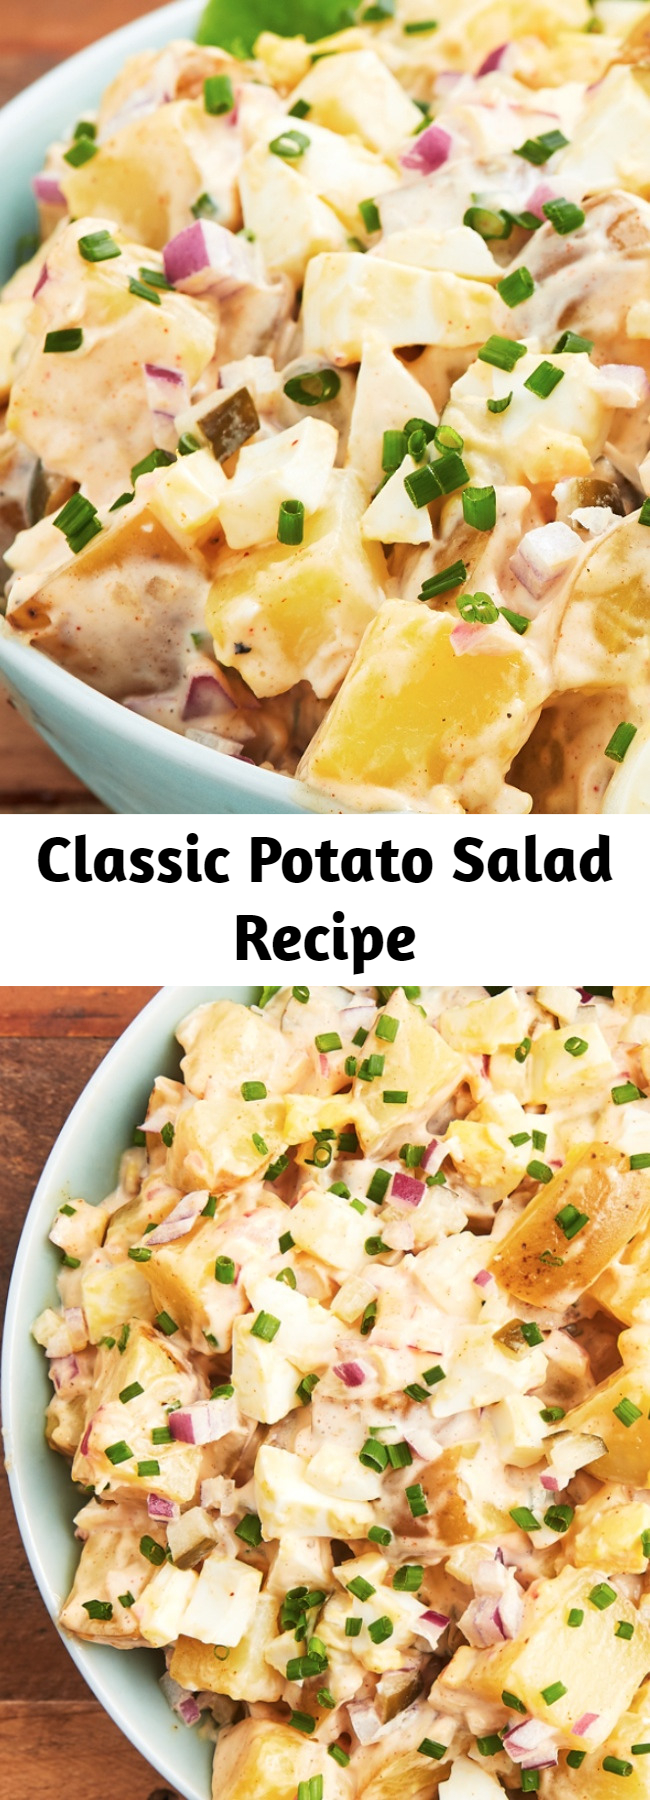 Classic Potato Salad Recipe - A classic potato salad is a must have at every barbecue and this is the best of the best. It's creamy, tangy, with a little bit of crunch, and the pickles make this potato salad stand out from all the rest. It's also our go-to year round.